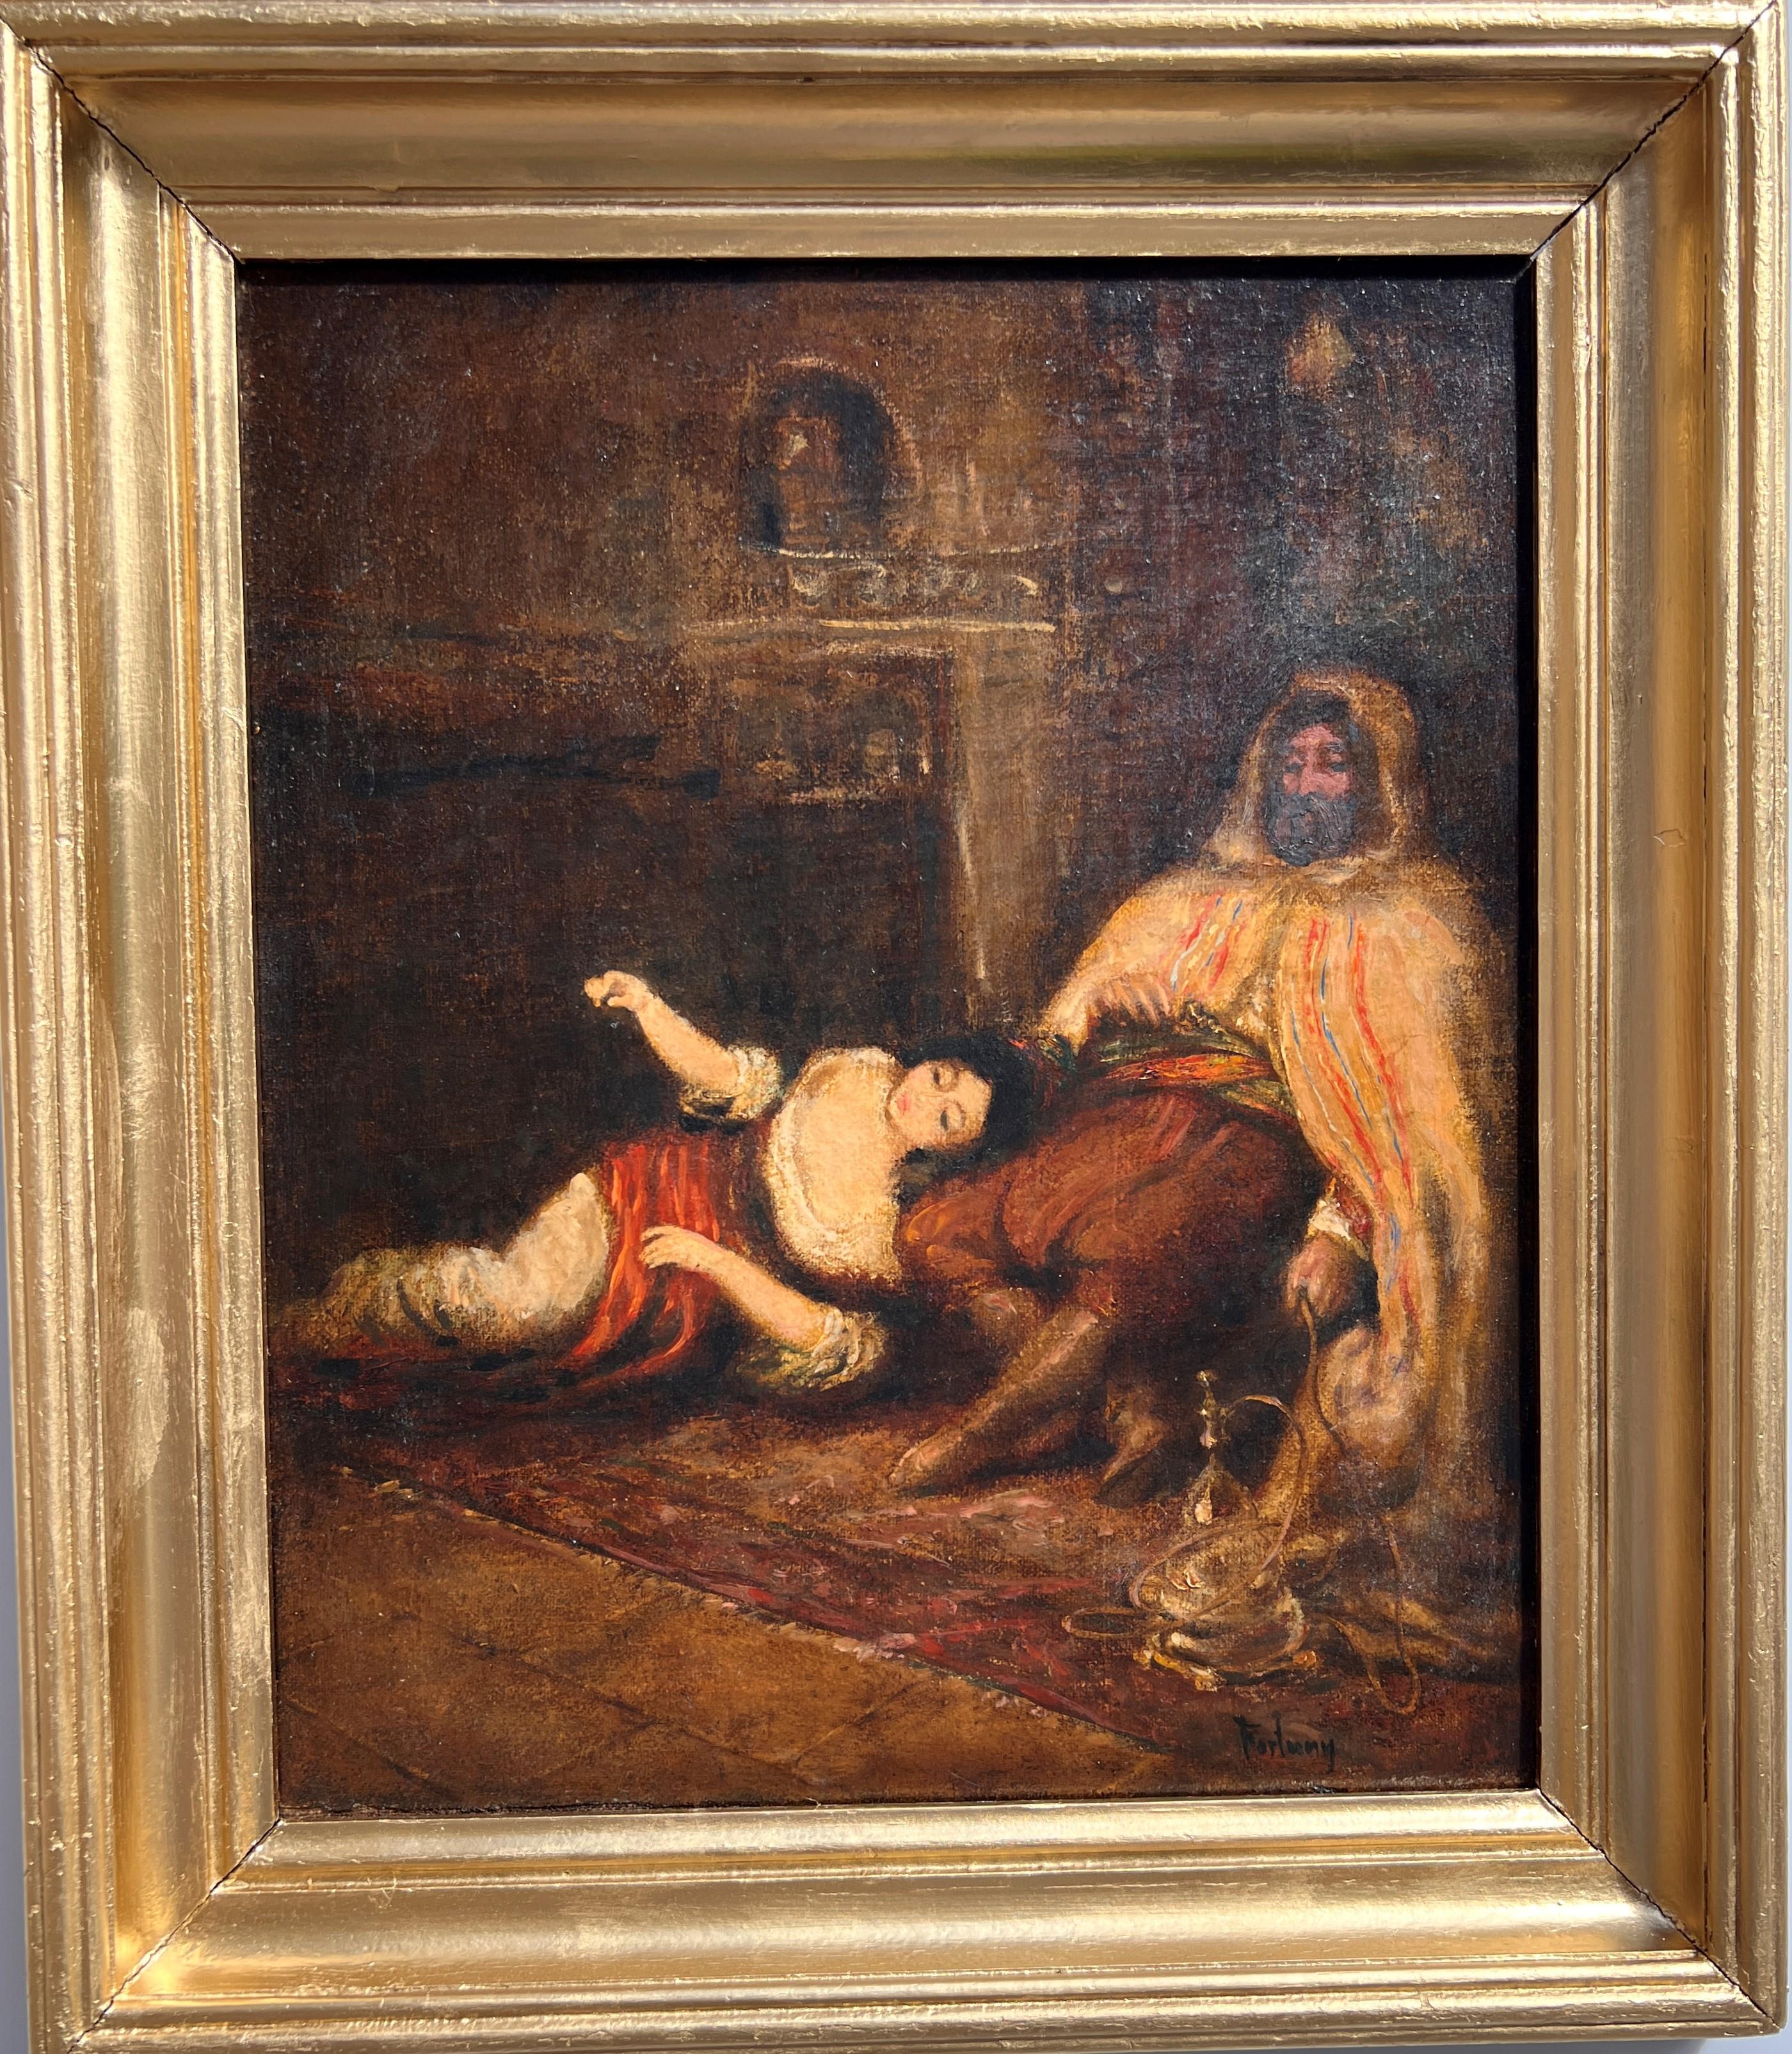 19TH C. OIL ON CANVAS, ORIENTALIST INTERIOR SCENE WITH FIGURES, SIGNED FORTUNY